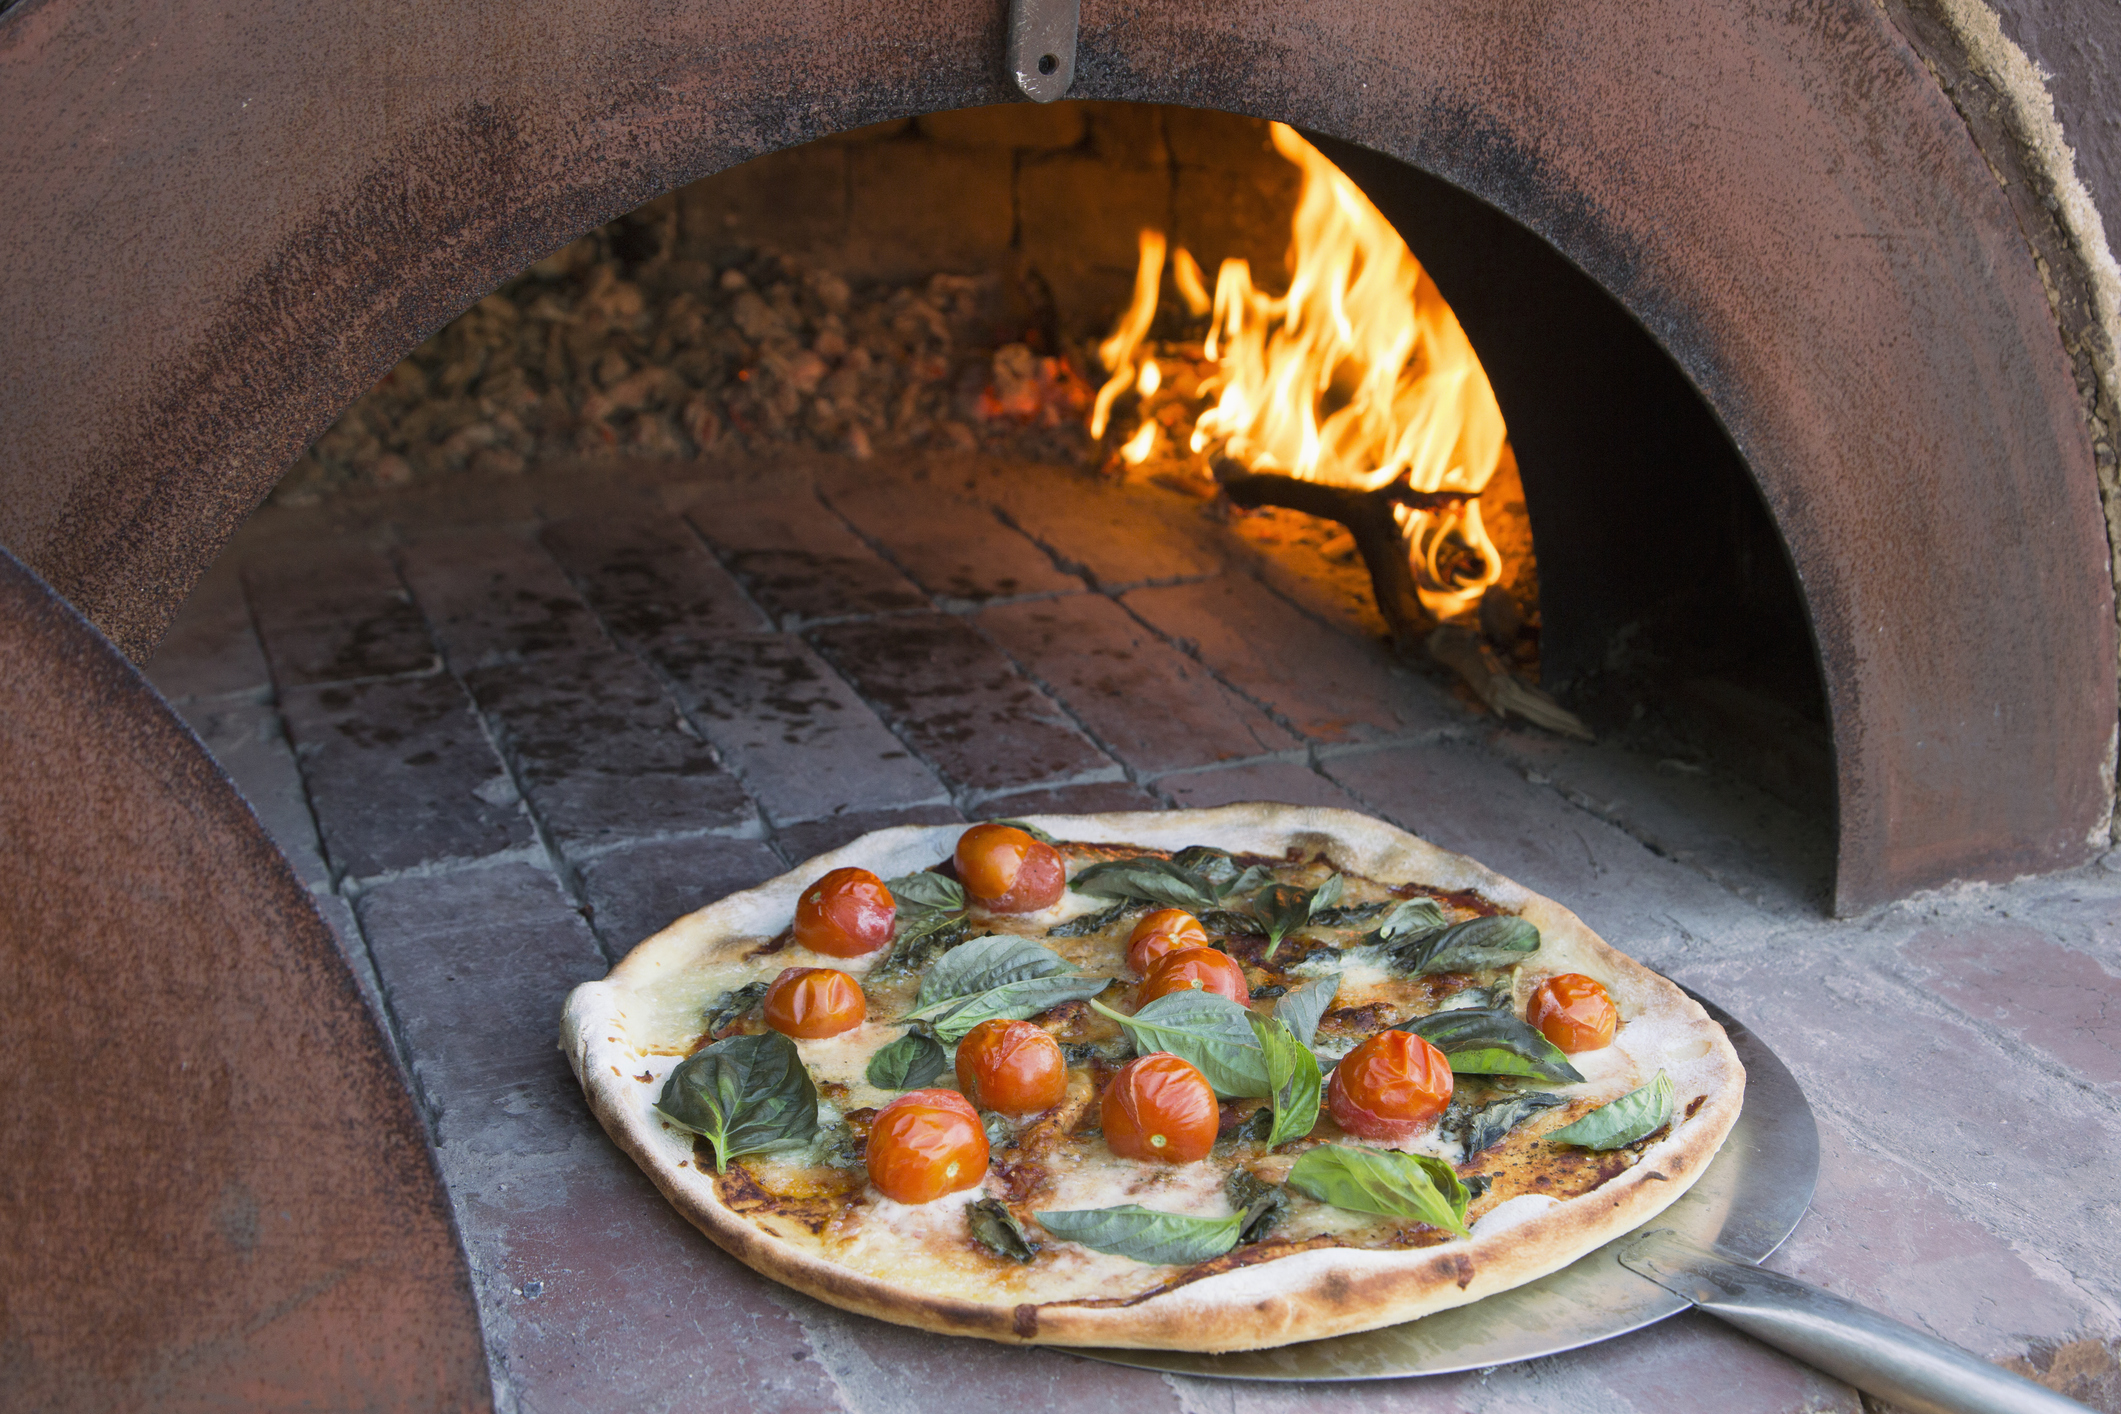 Pizza coming out of an outdoor pizza oven